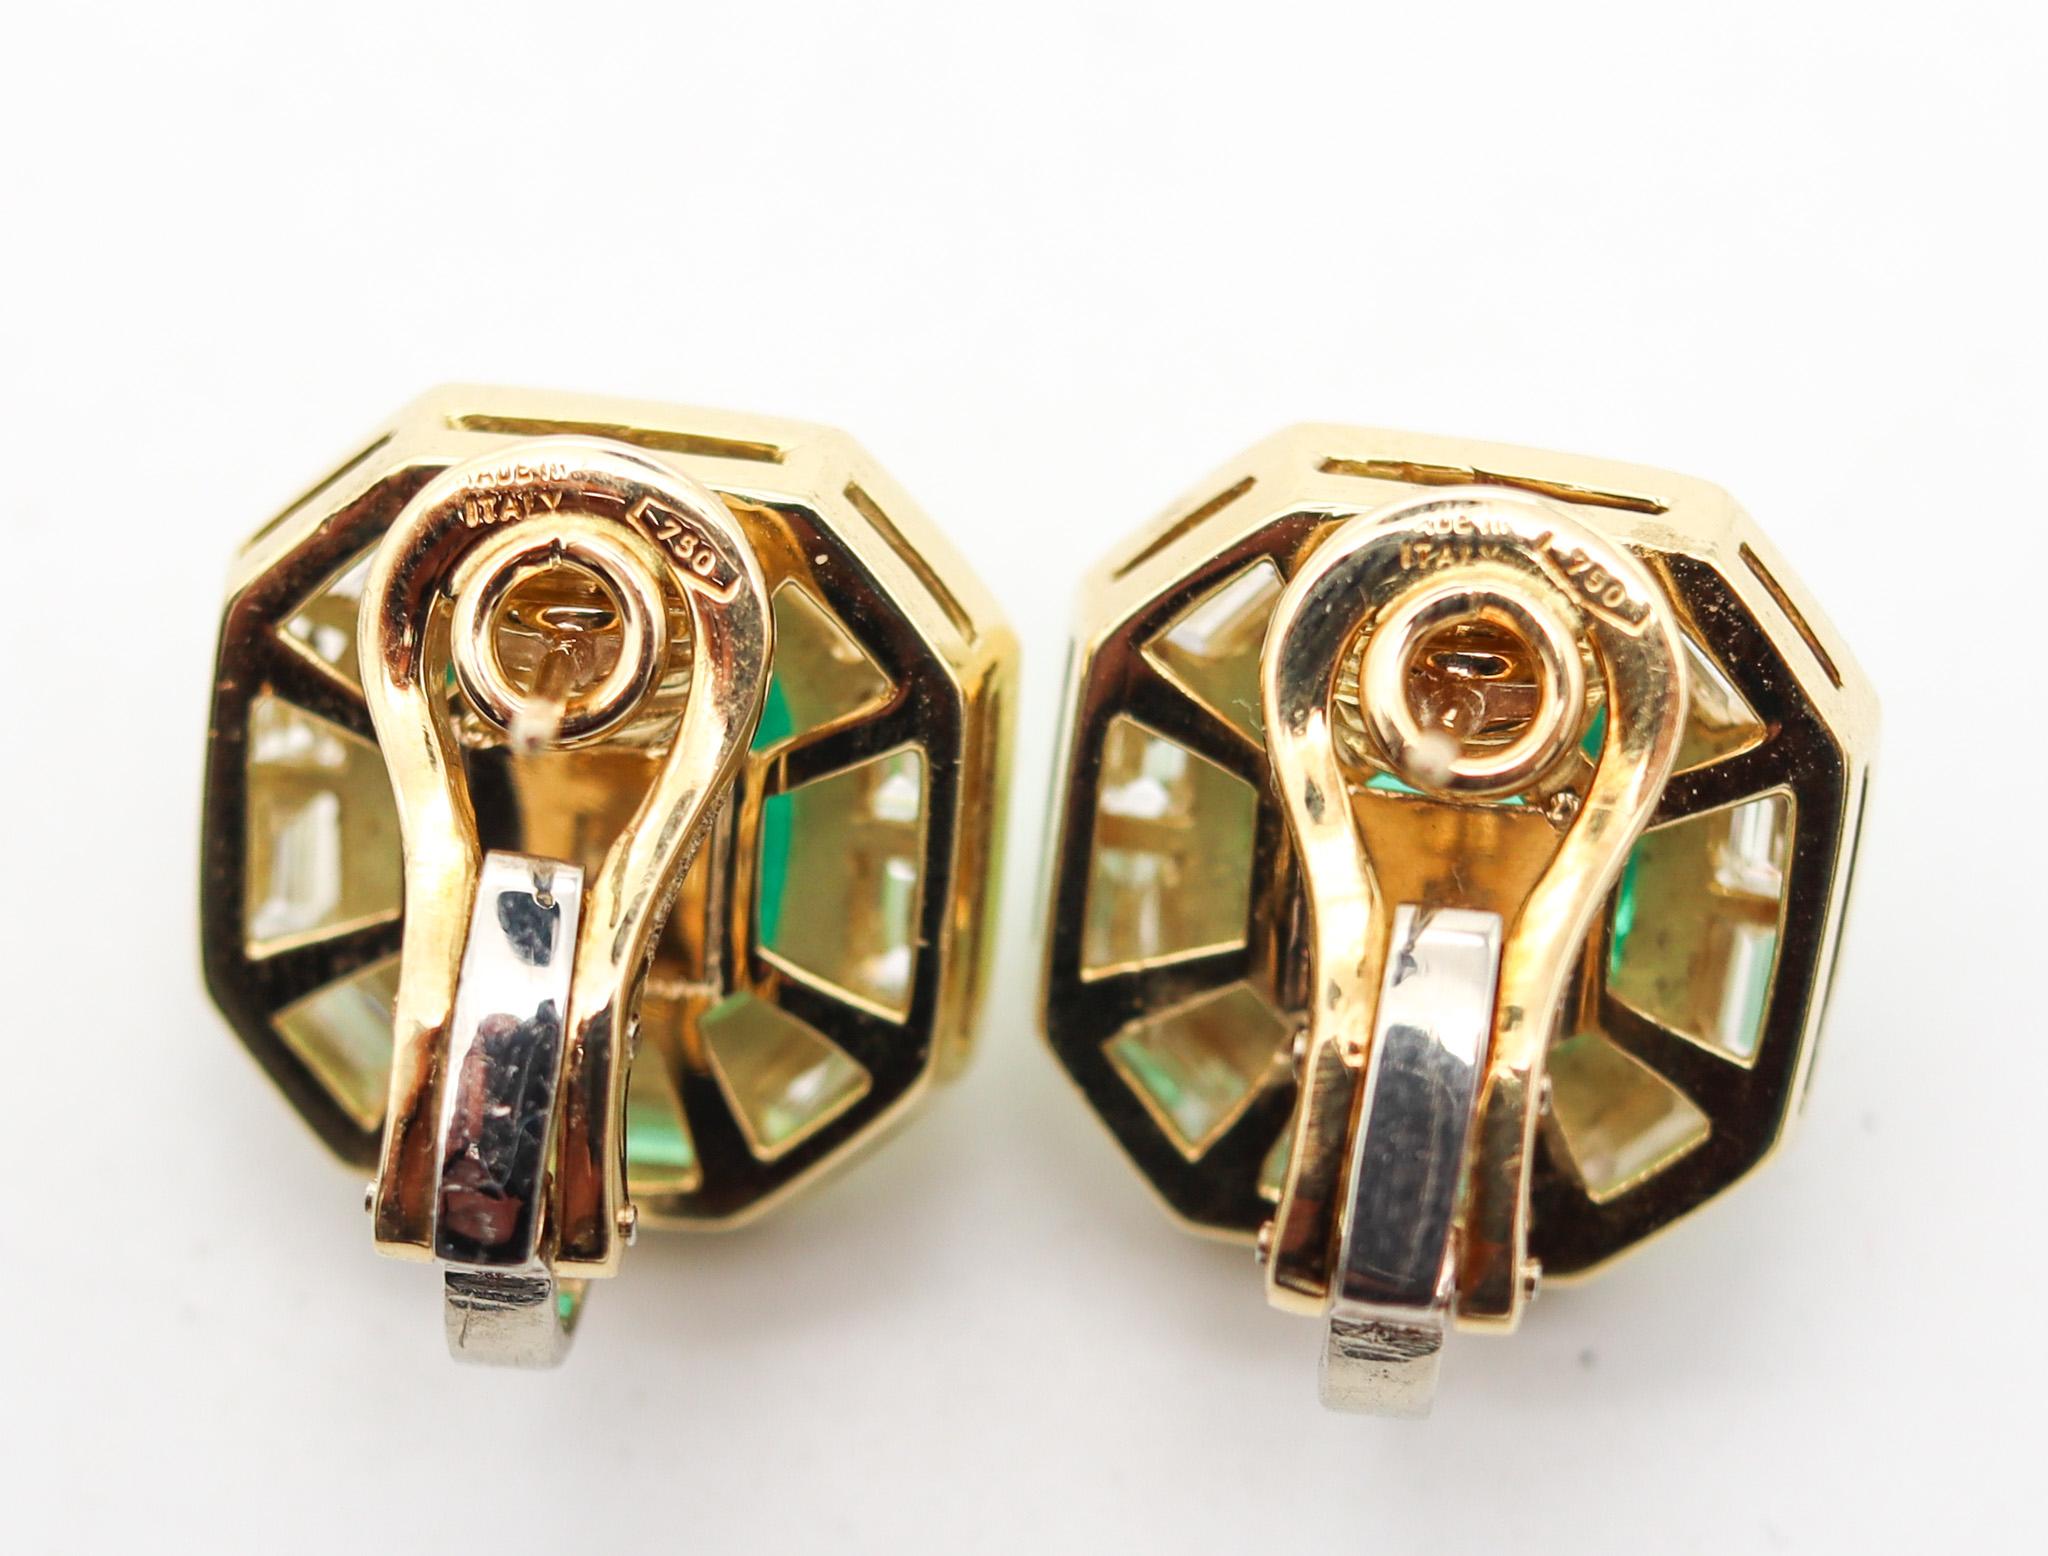 Emerald Cut Bvlgari Clip On Earrings In 18Kt Gold With 11.72 Ctw In Diamonds And Emeralds For Sale